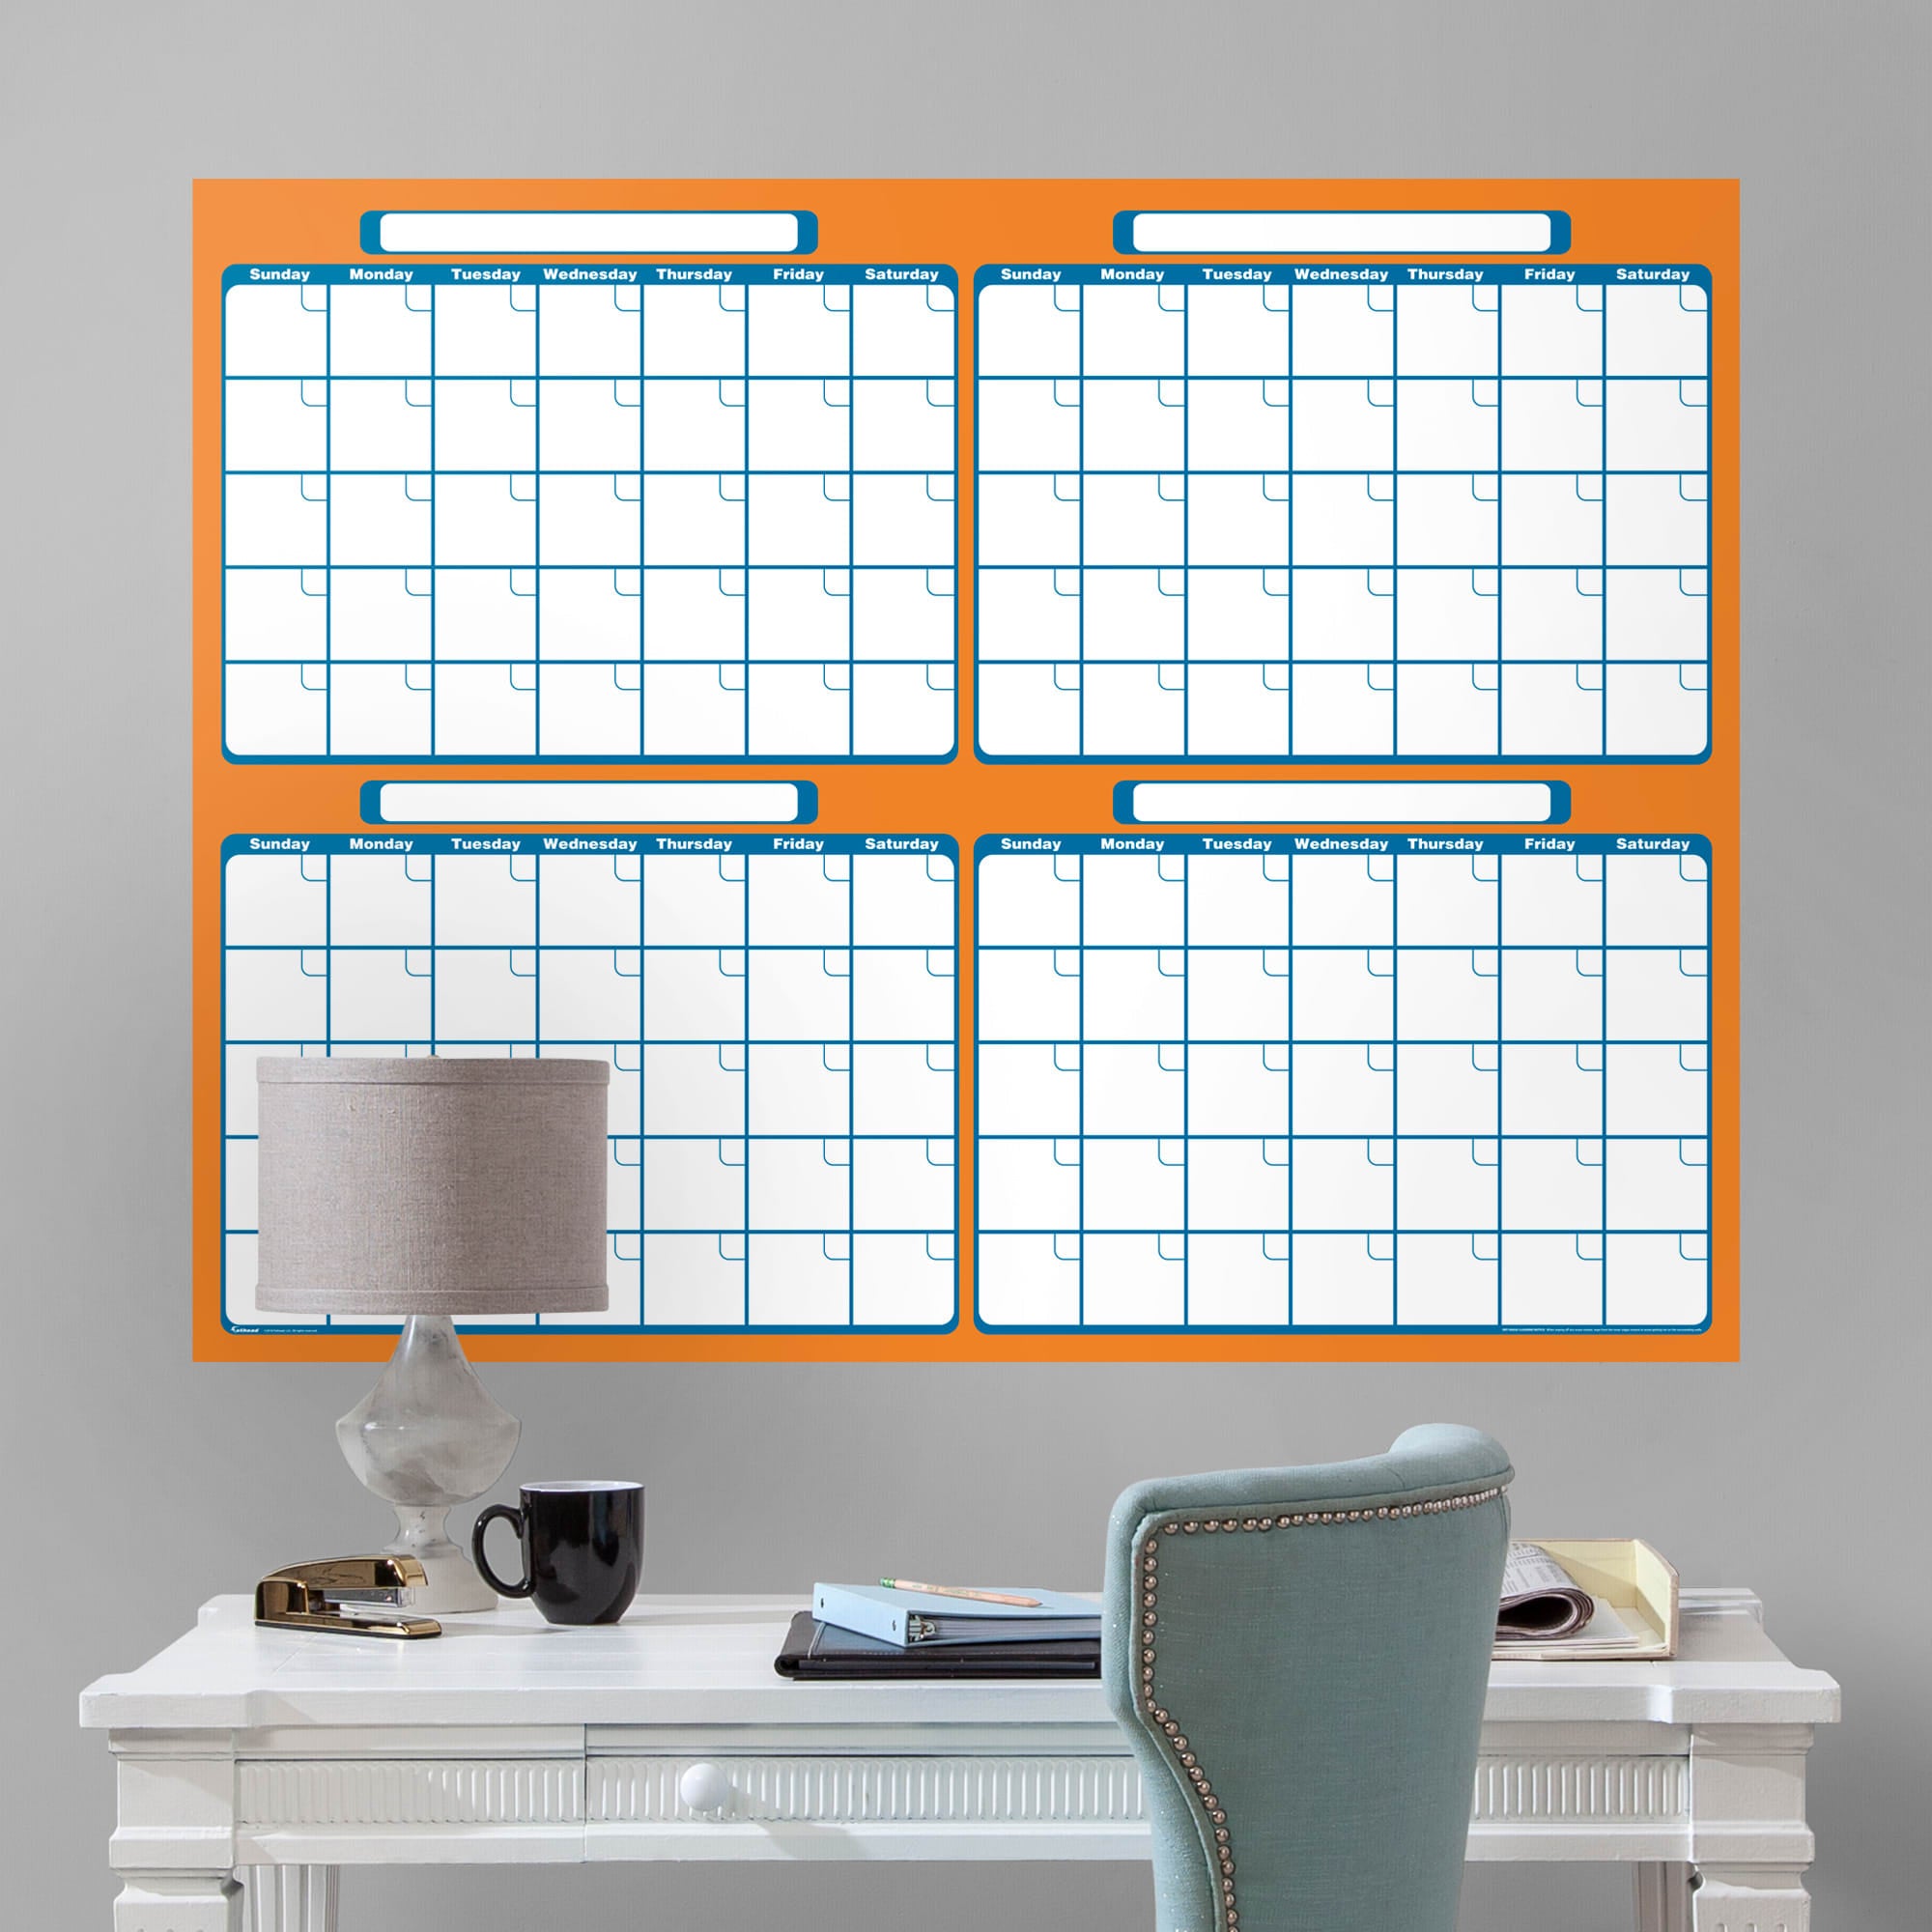 Four Month Calendar - Removable Dry Erase Vinyl Decal in Orange/Royal Blue (52"Wx39.5"H) by Fathead